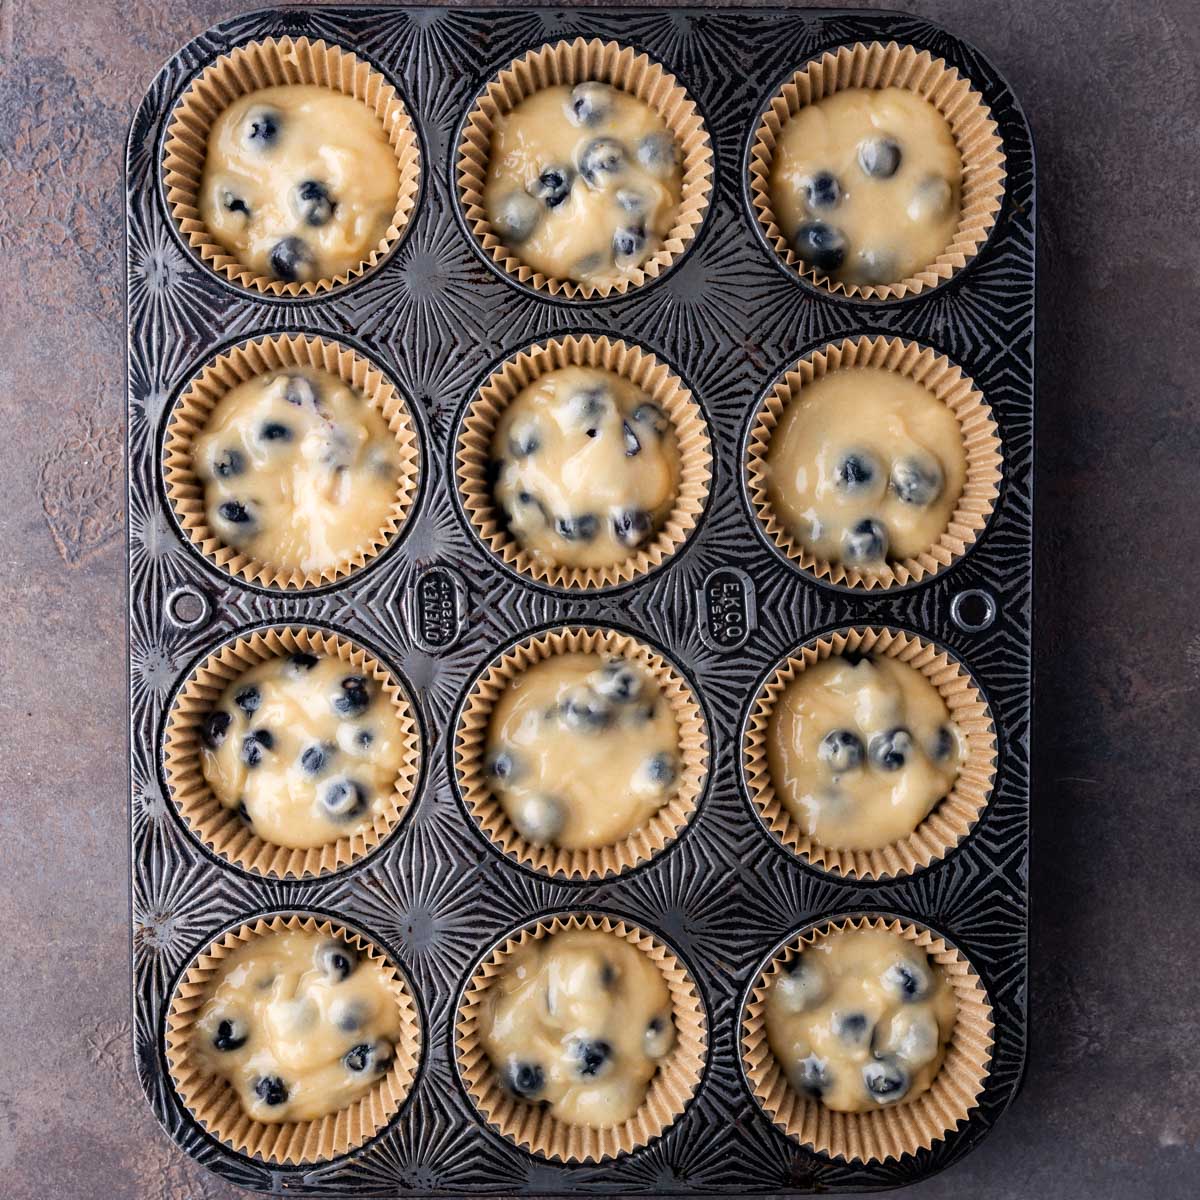 unbaked blueberry muffins